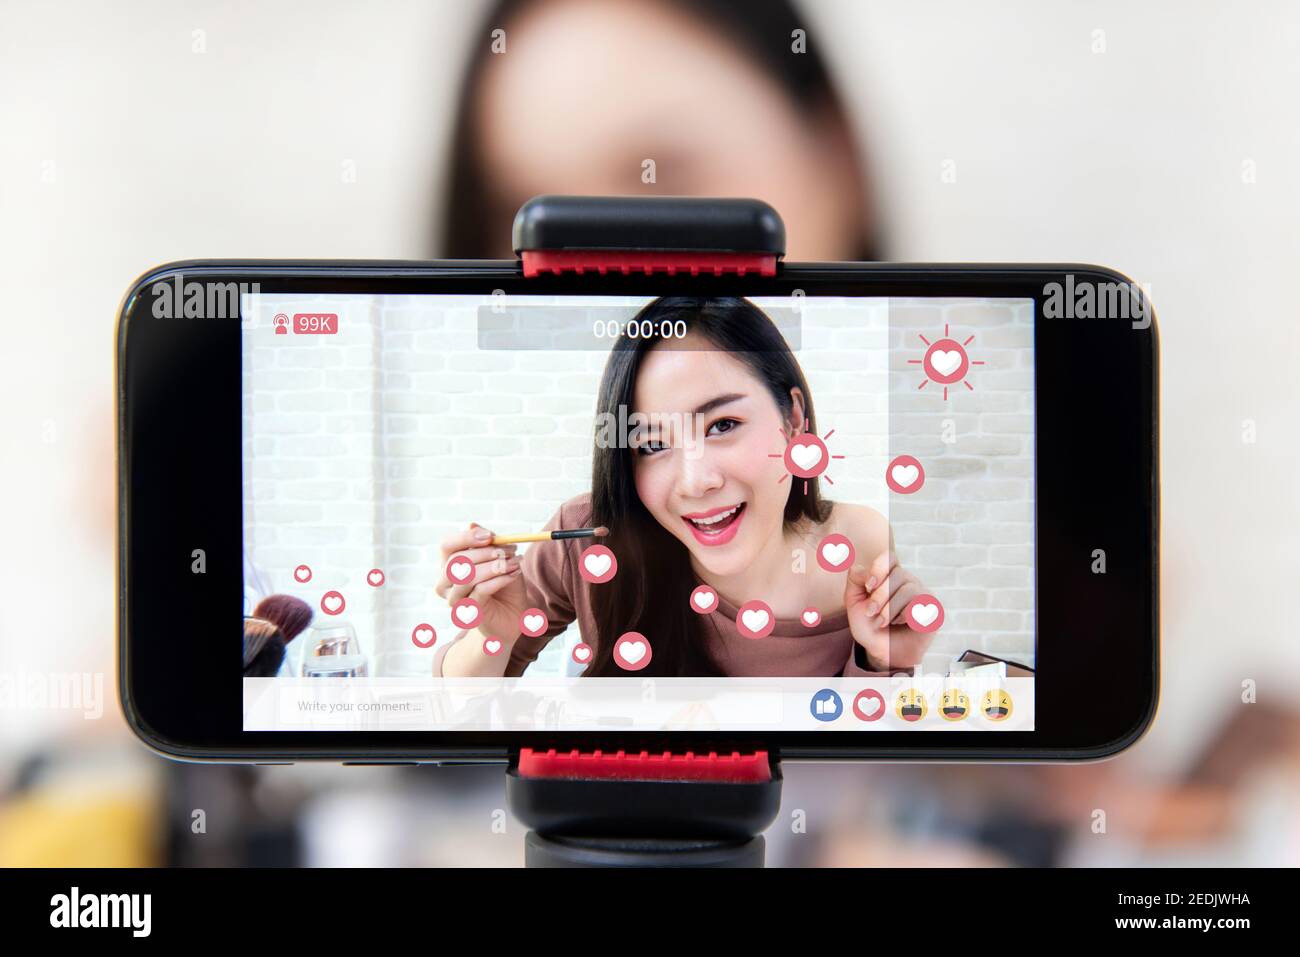 Asian woman professional beauty vlogger or blogger live broadcasting cosmetic makeup tutorial viral video clip by smartphone on social media Stock Photo